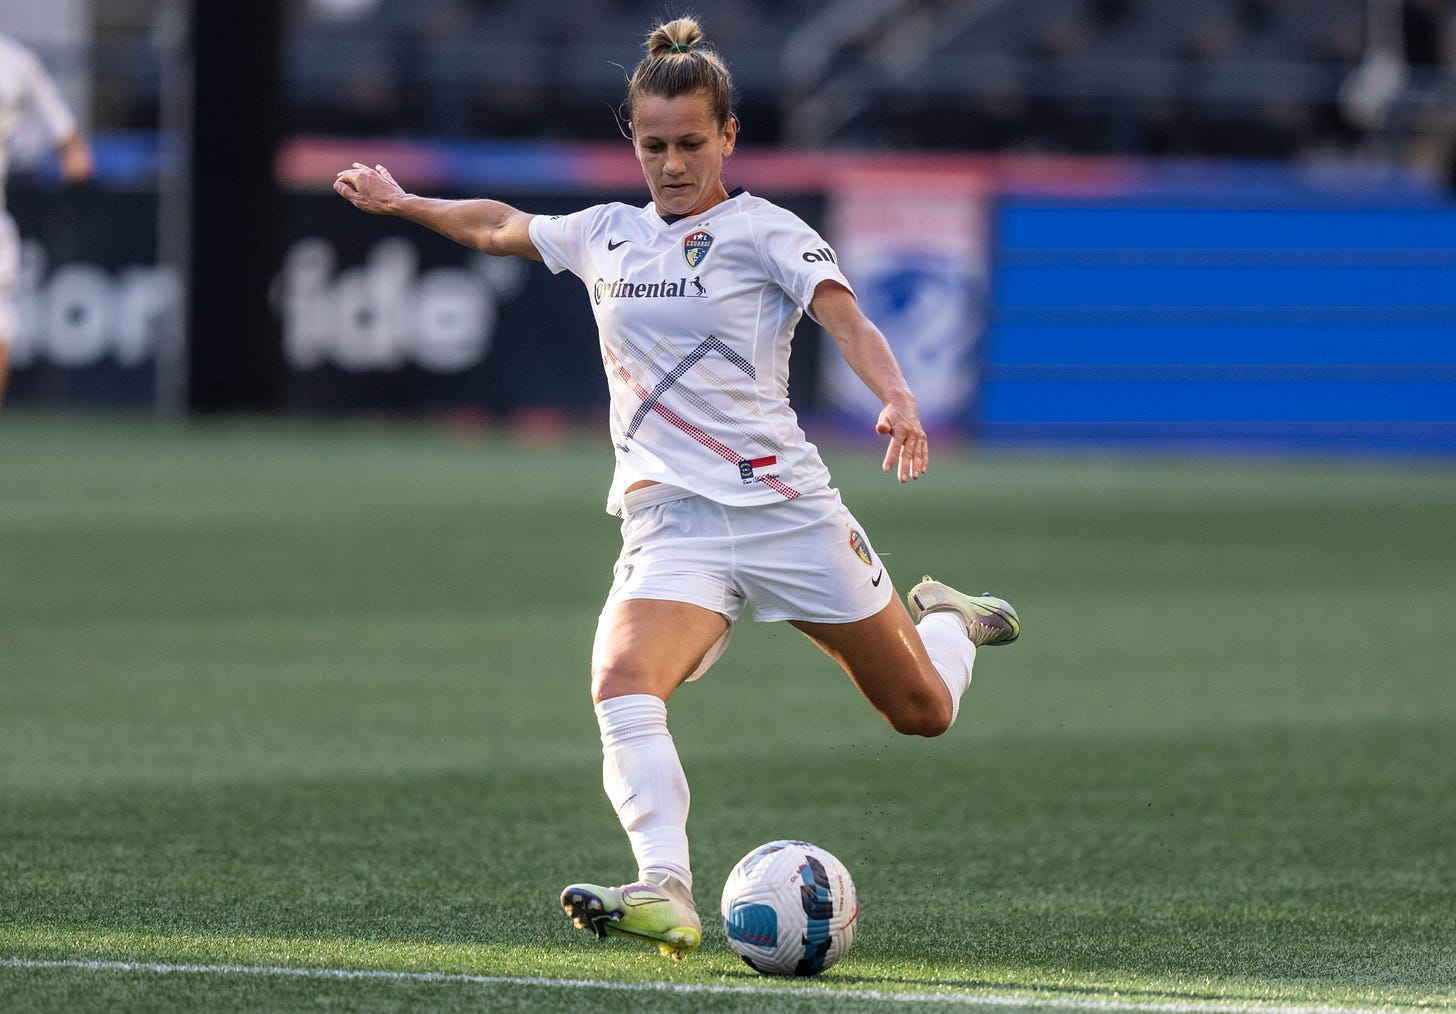 Meredith Speck in action for North Carolina Courage in 2022.